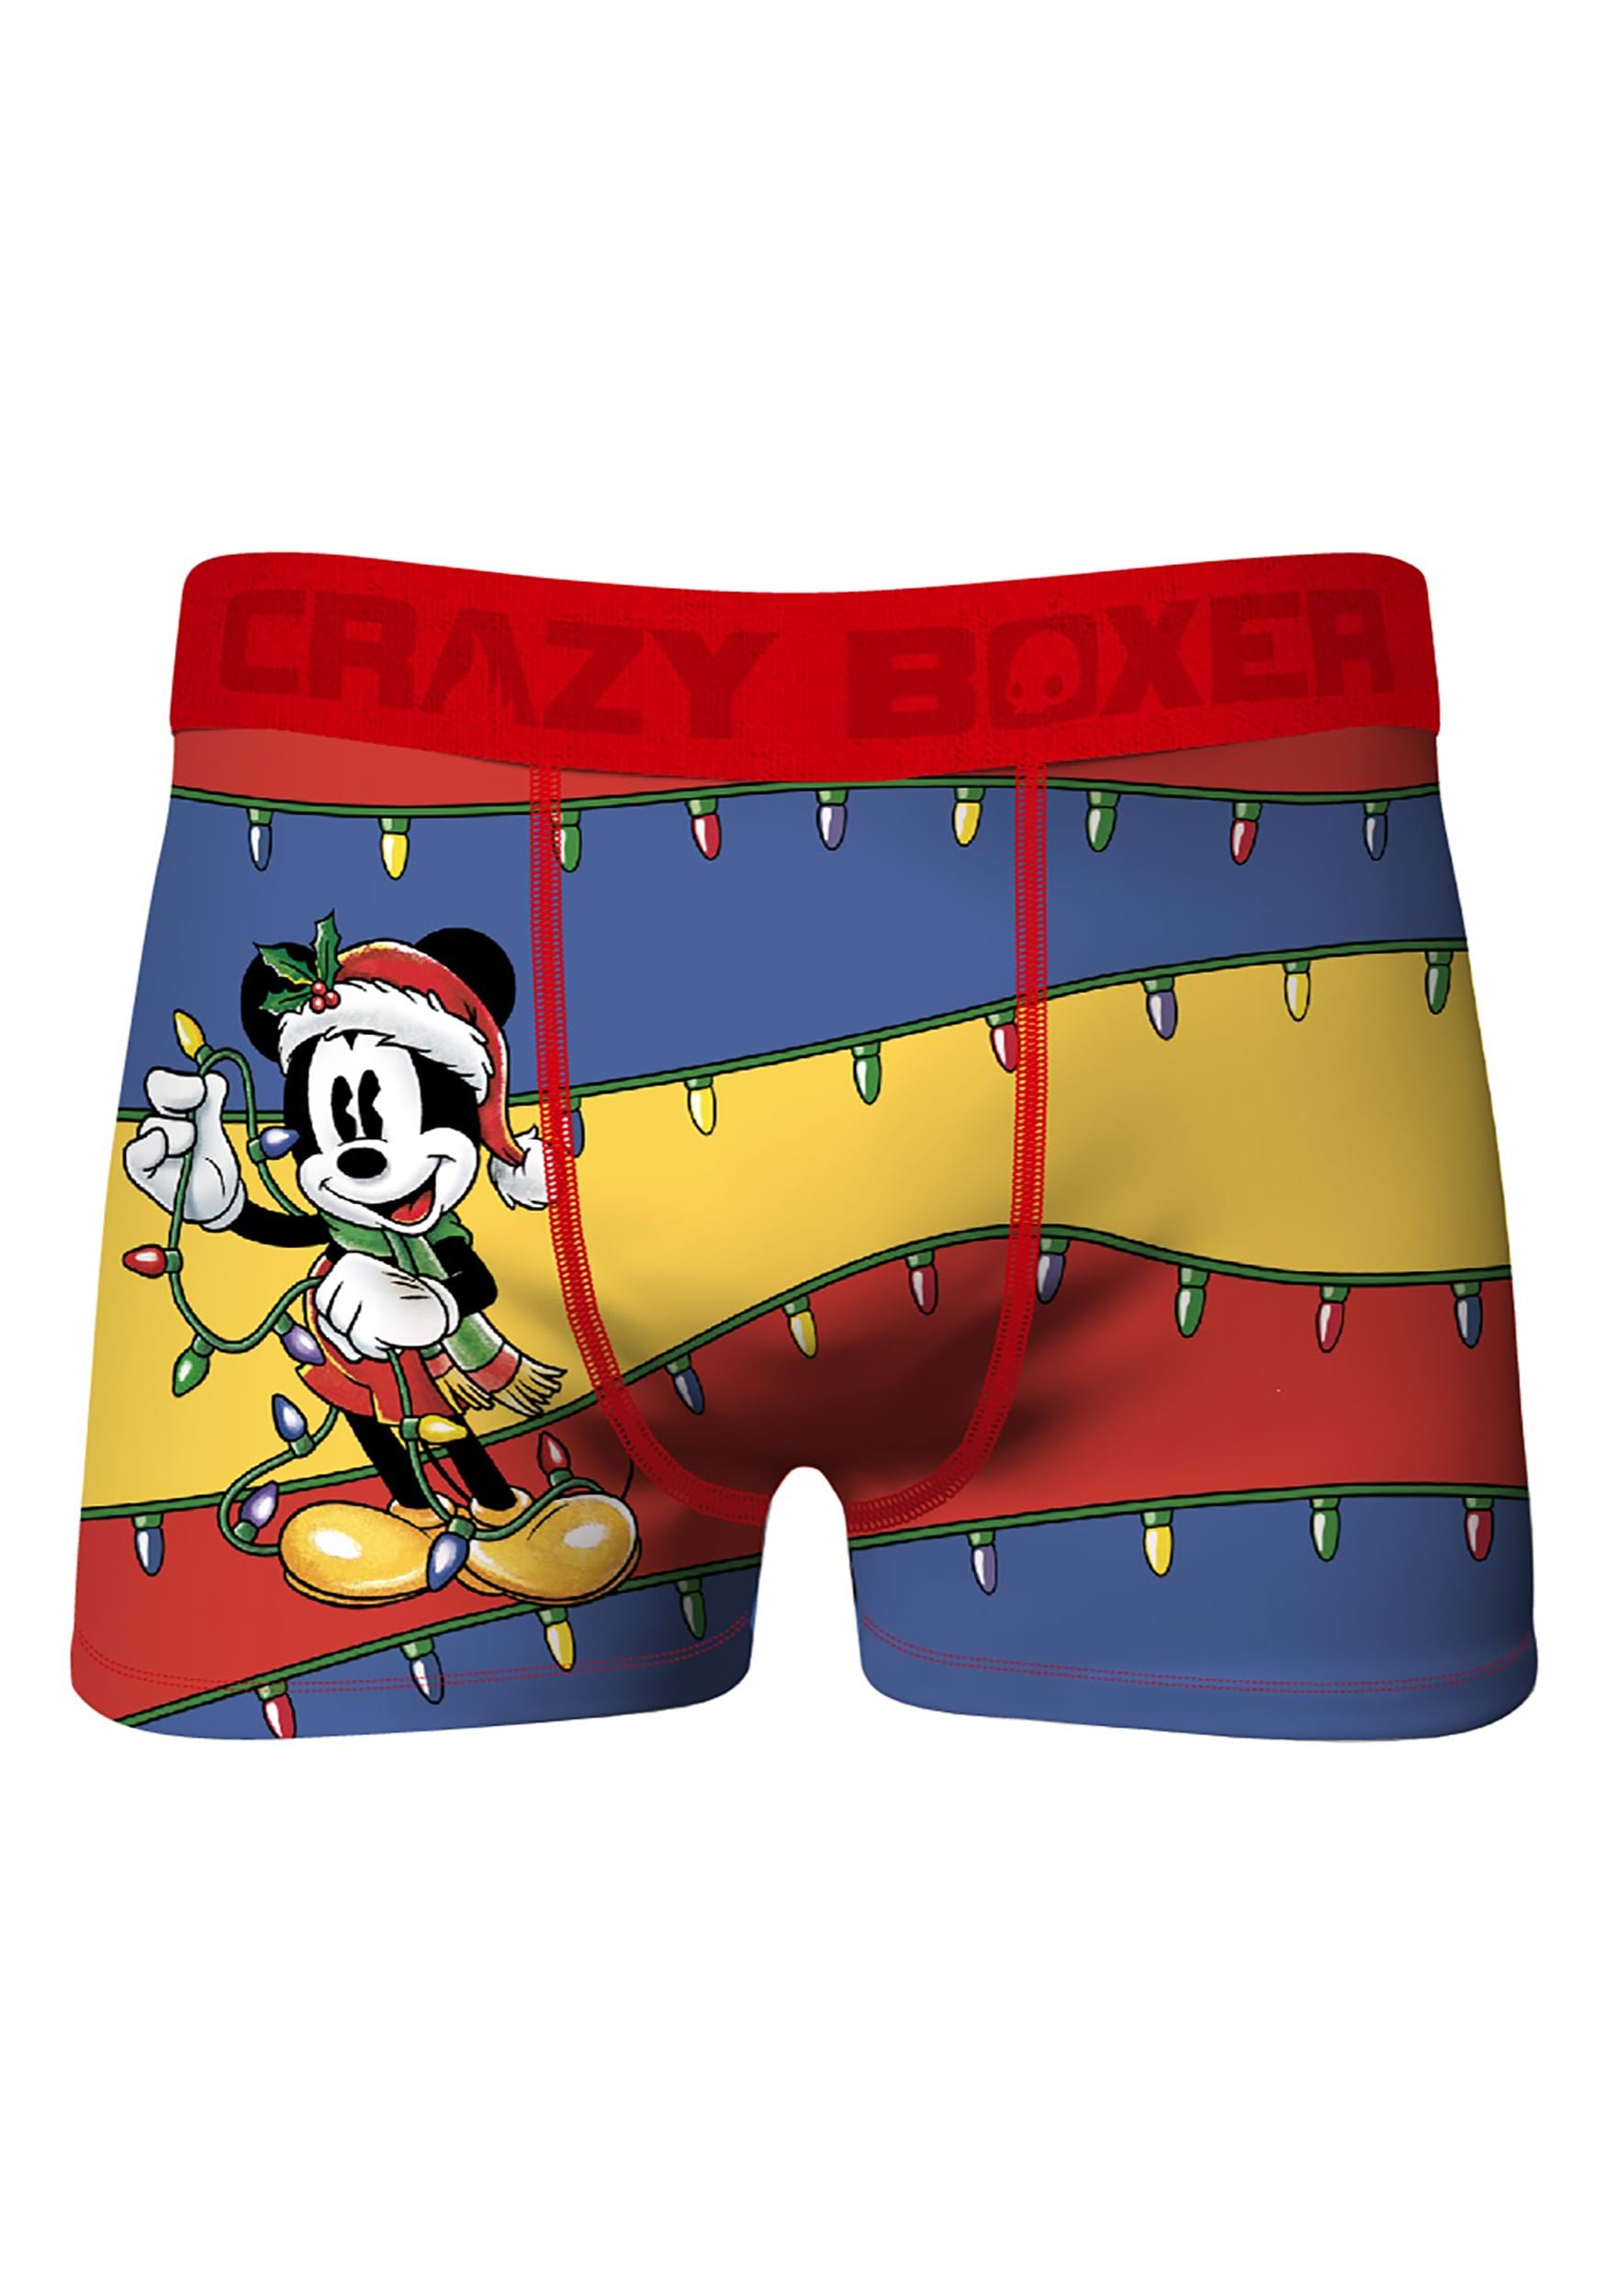 Crazy Boxer Holiday Mickey Men's 2 Pack Boxer Briefs